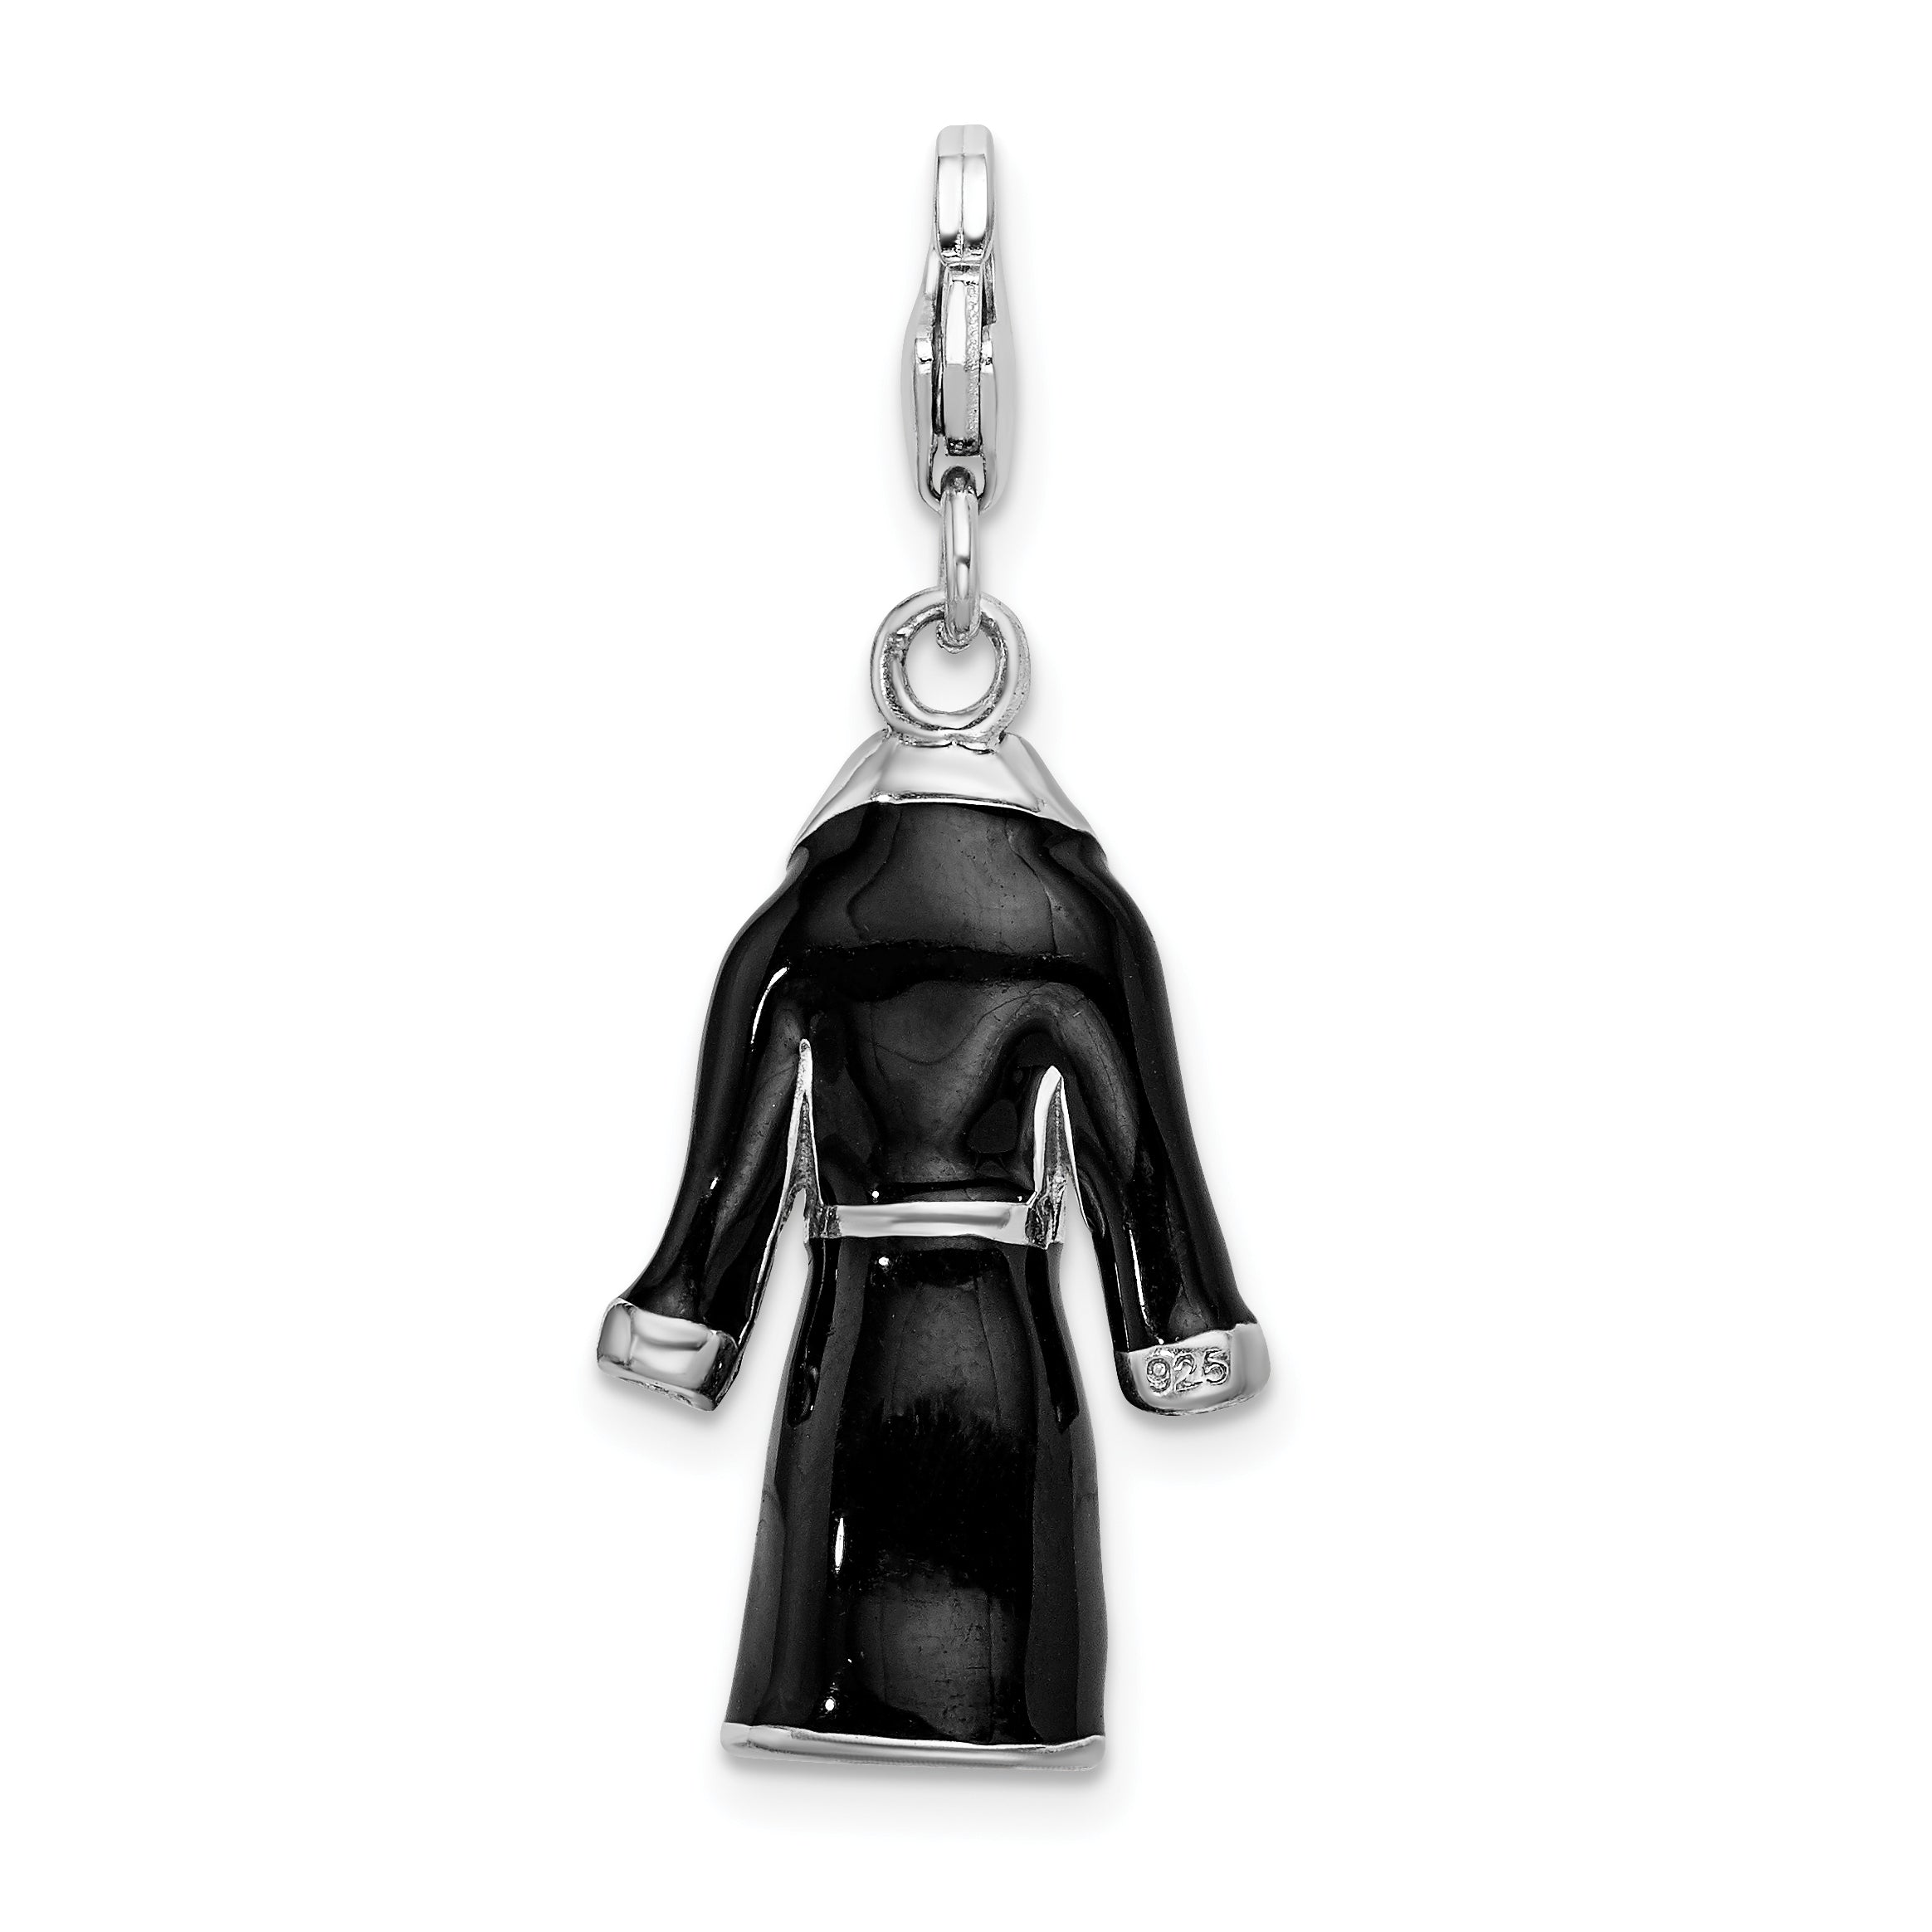 Sterling Silver 3-D Enameled Black Robe w/Lobster Clasp Charm